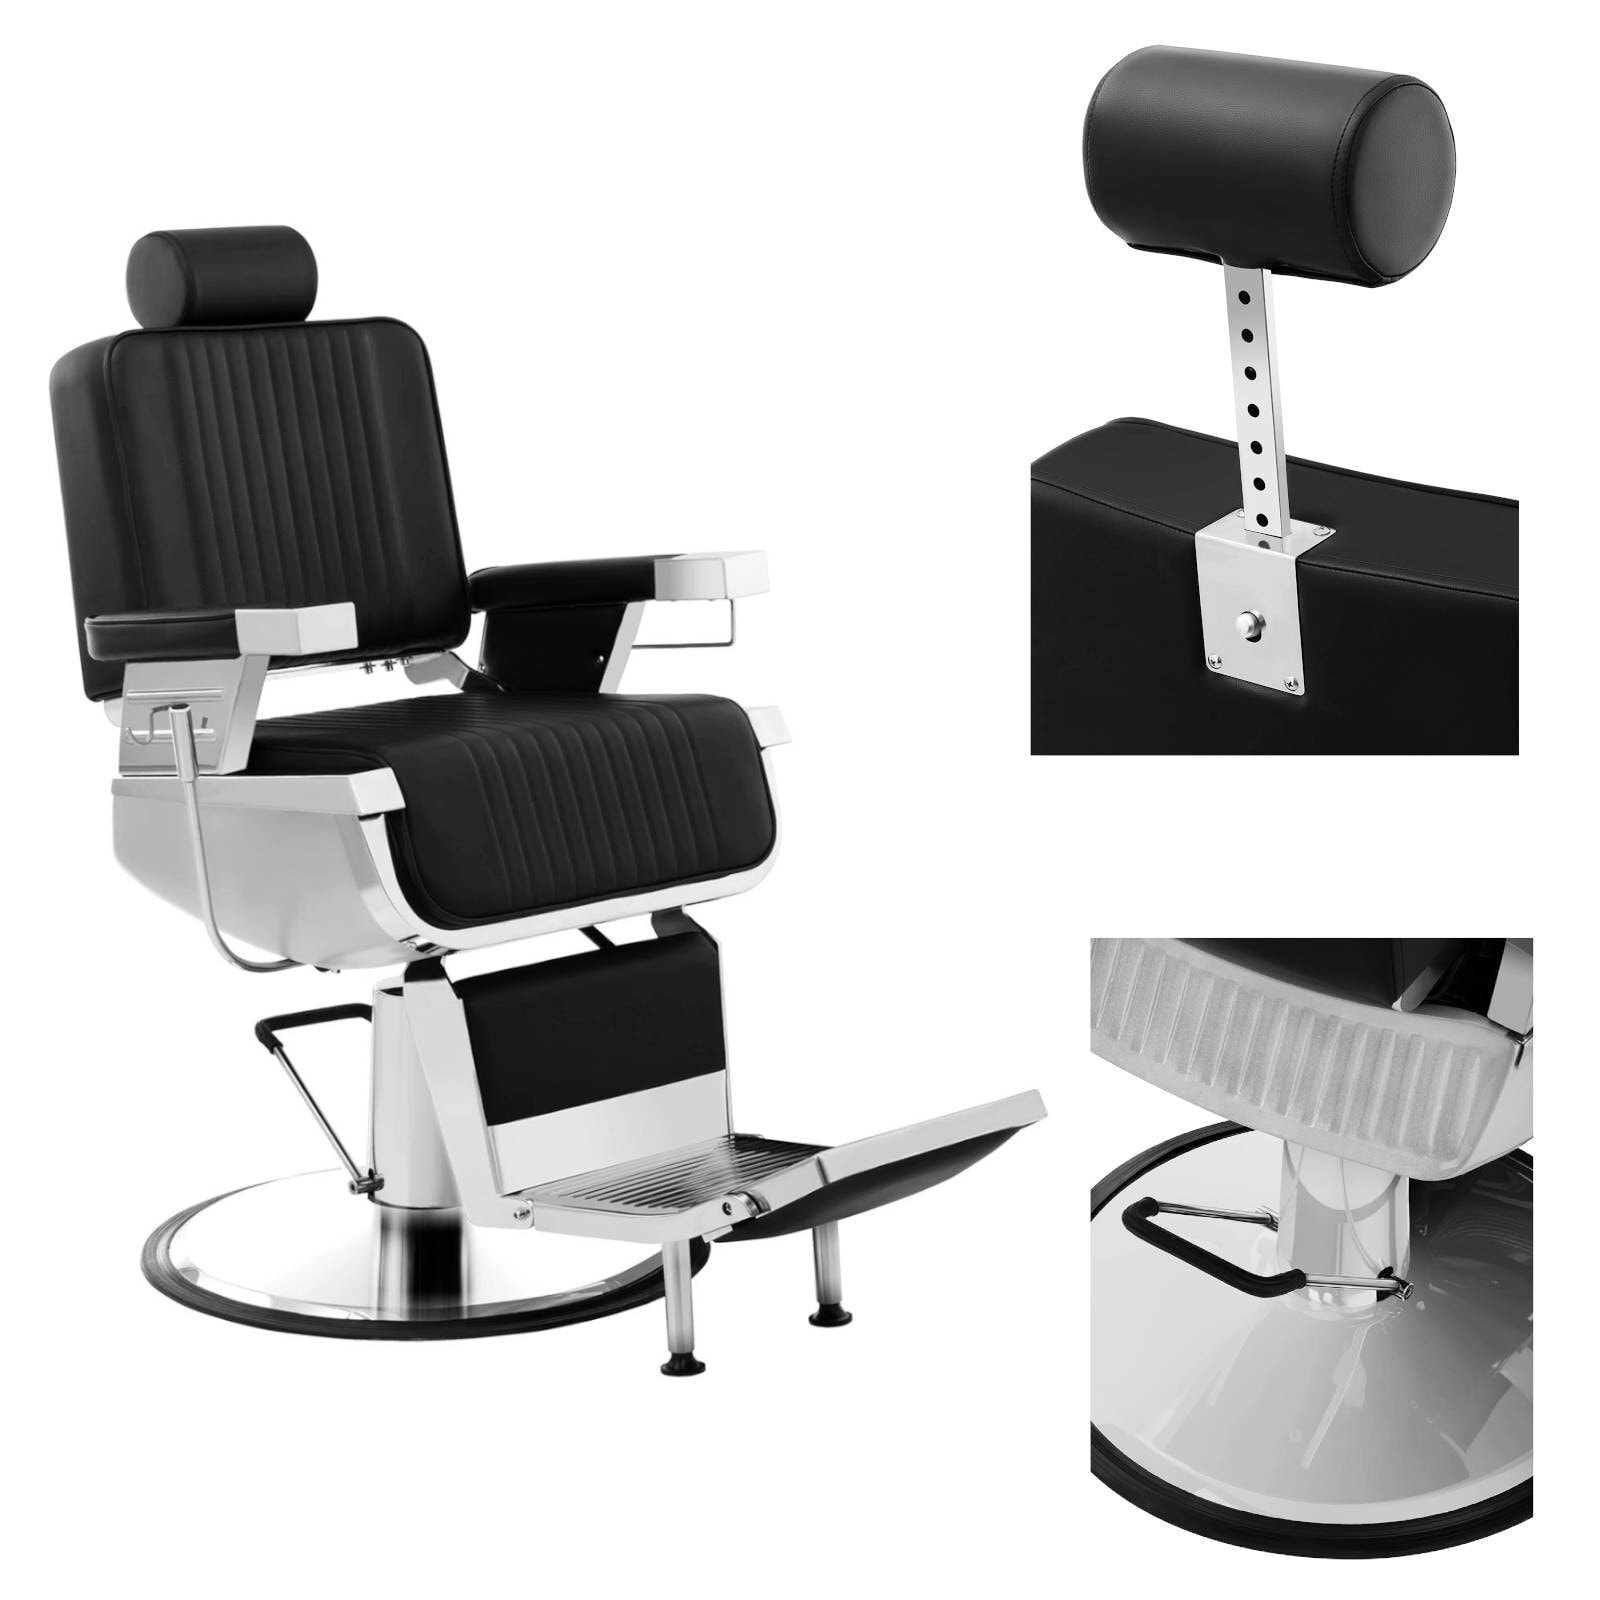 Professional barber chair with a rotating footrest LUXURIA Physa black